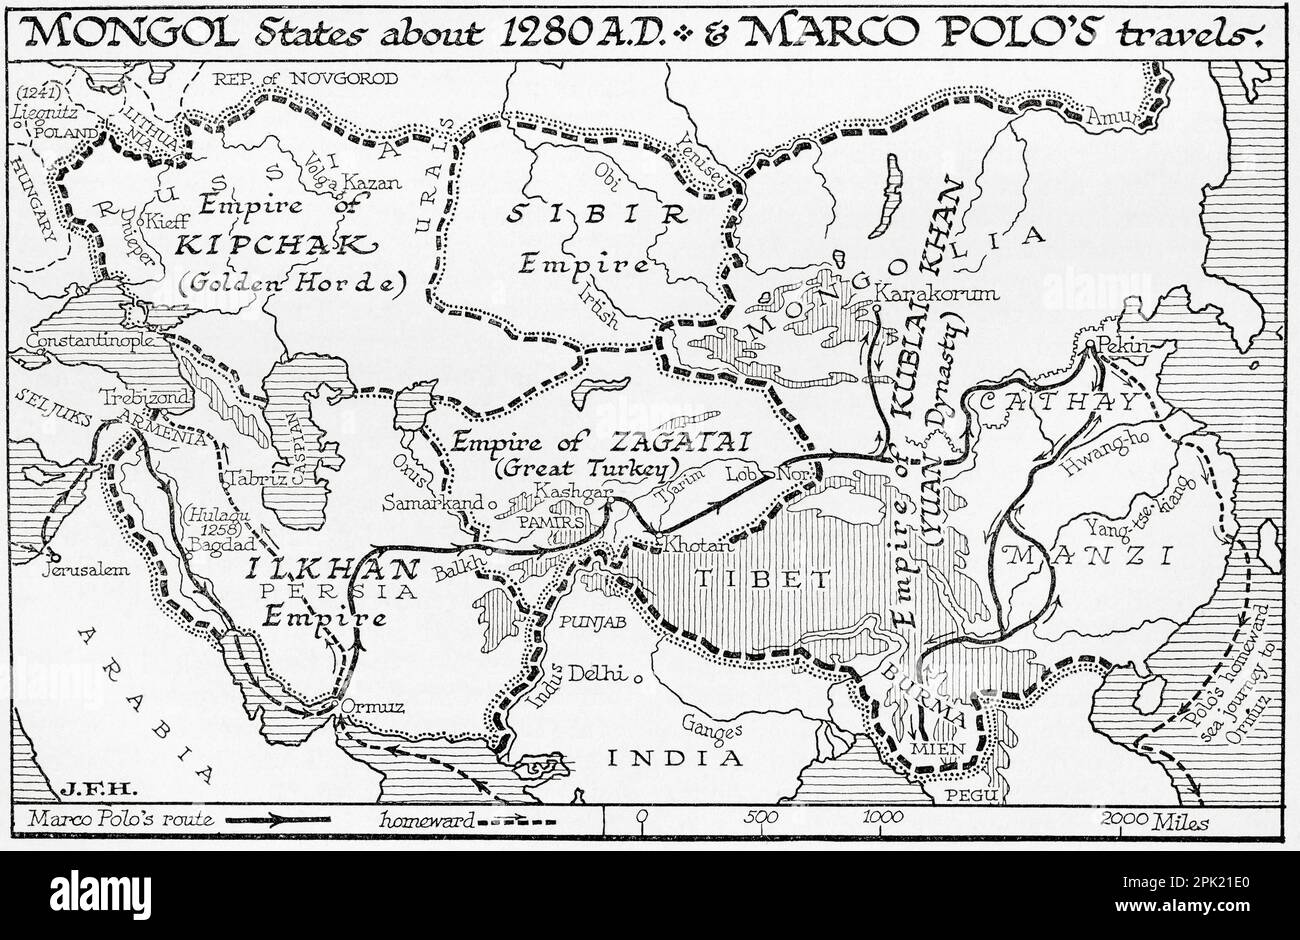 Map of the Mongol States c. 1280 AD and Marco Polo's travels.  From the book Outline of History by H.G. Wells, published 1920. Stock Photo